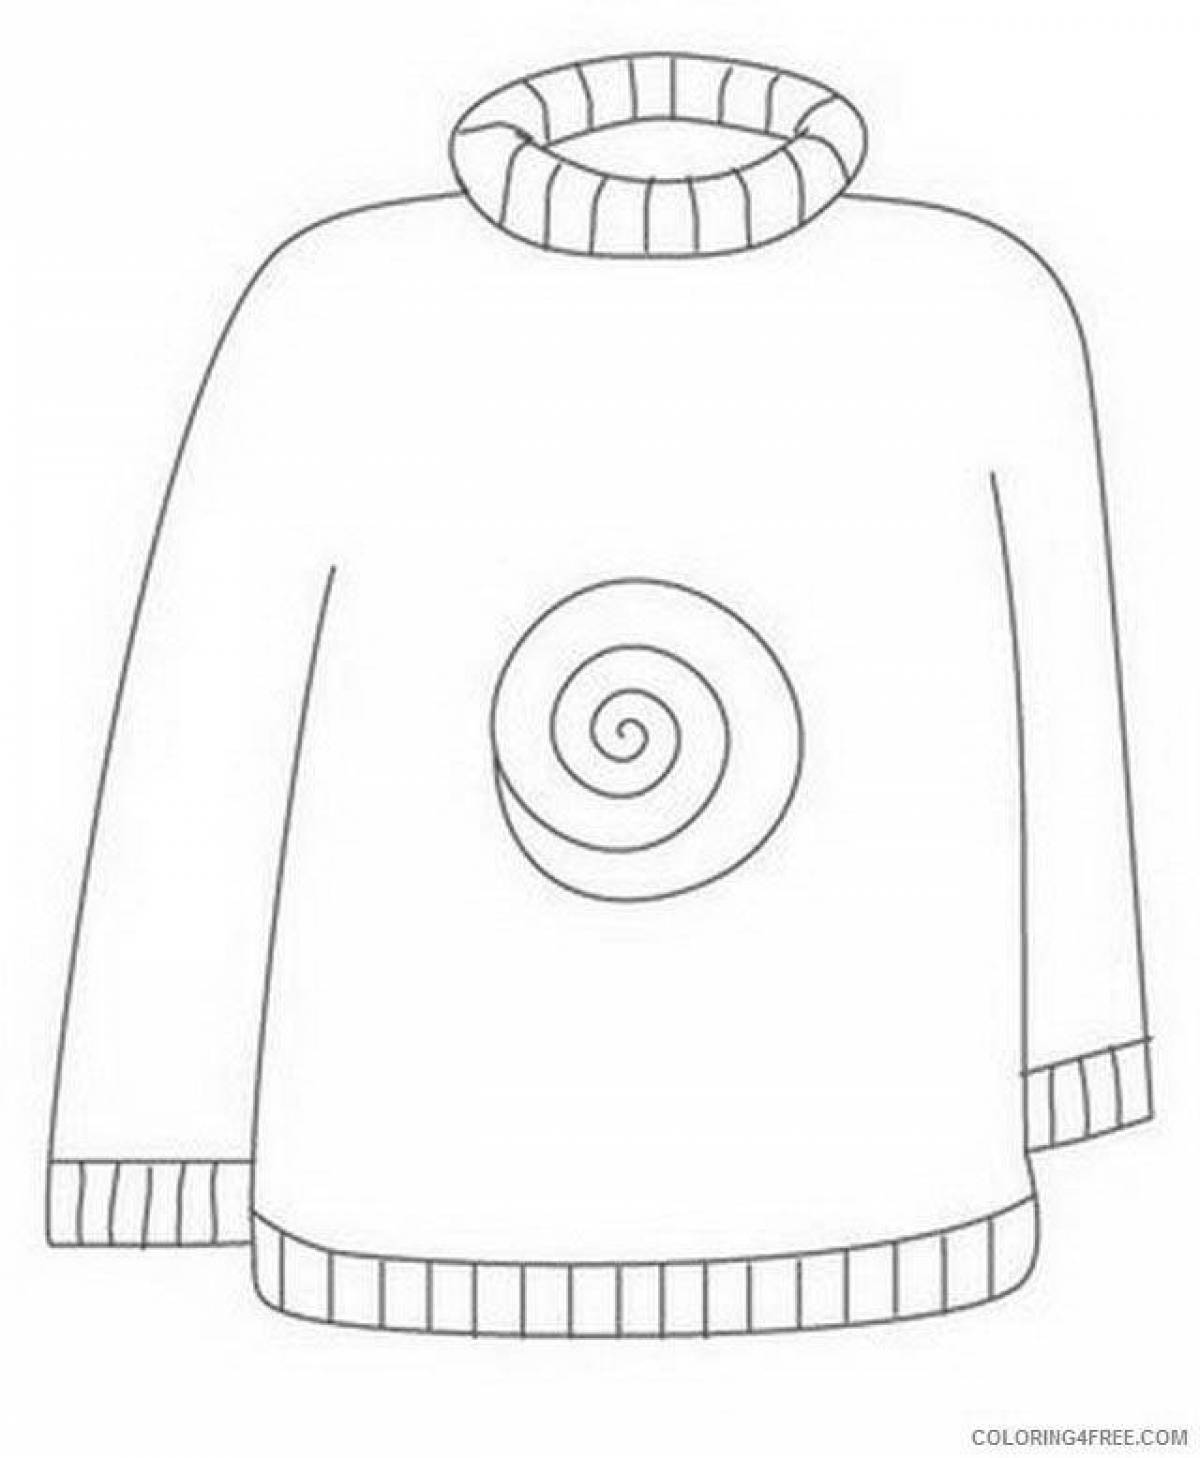 Glittering sweater coloring page